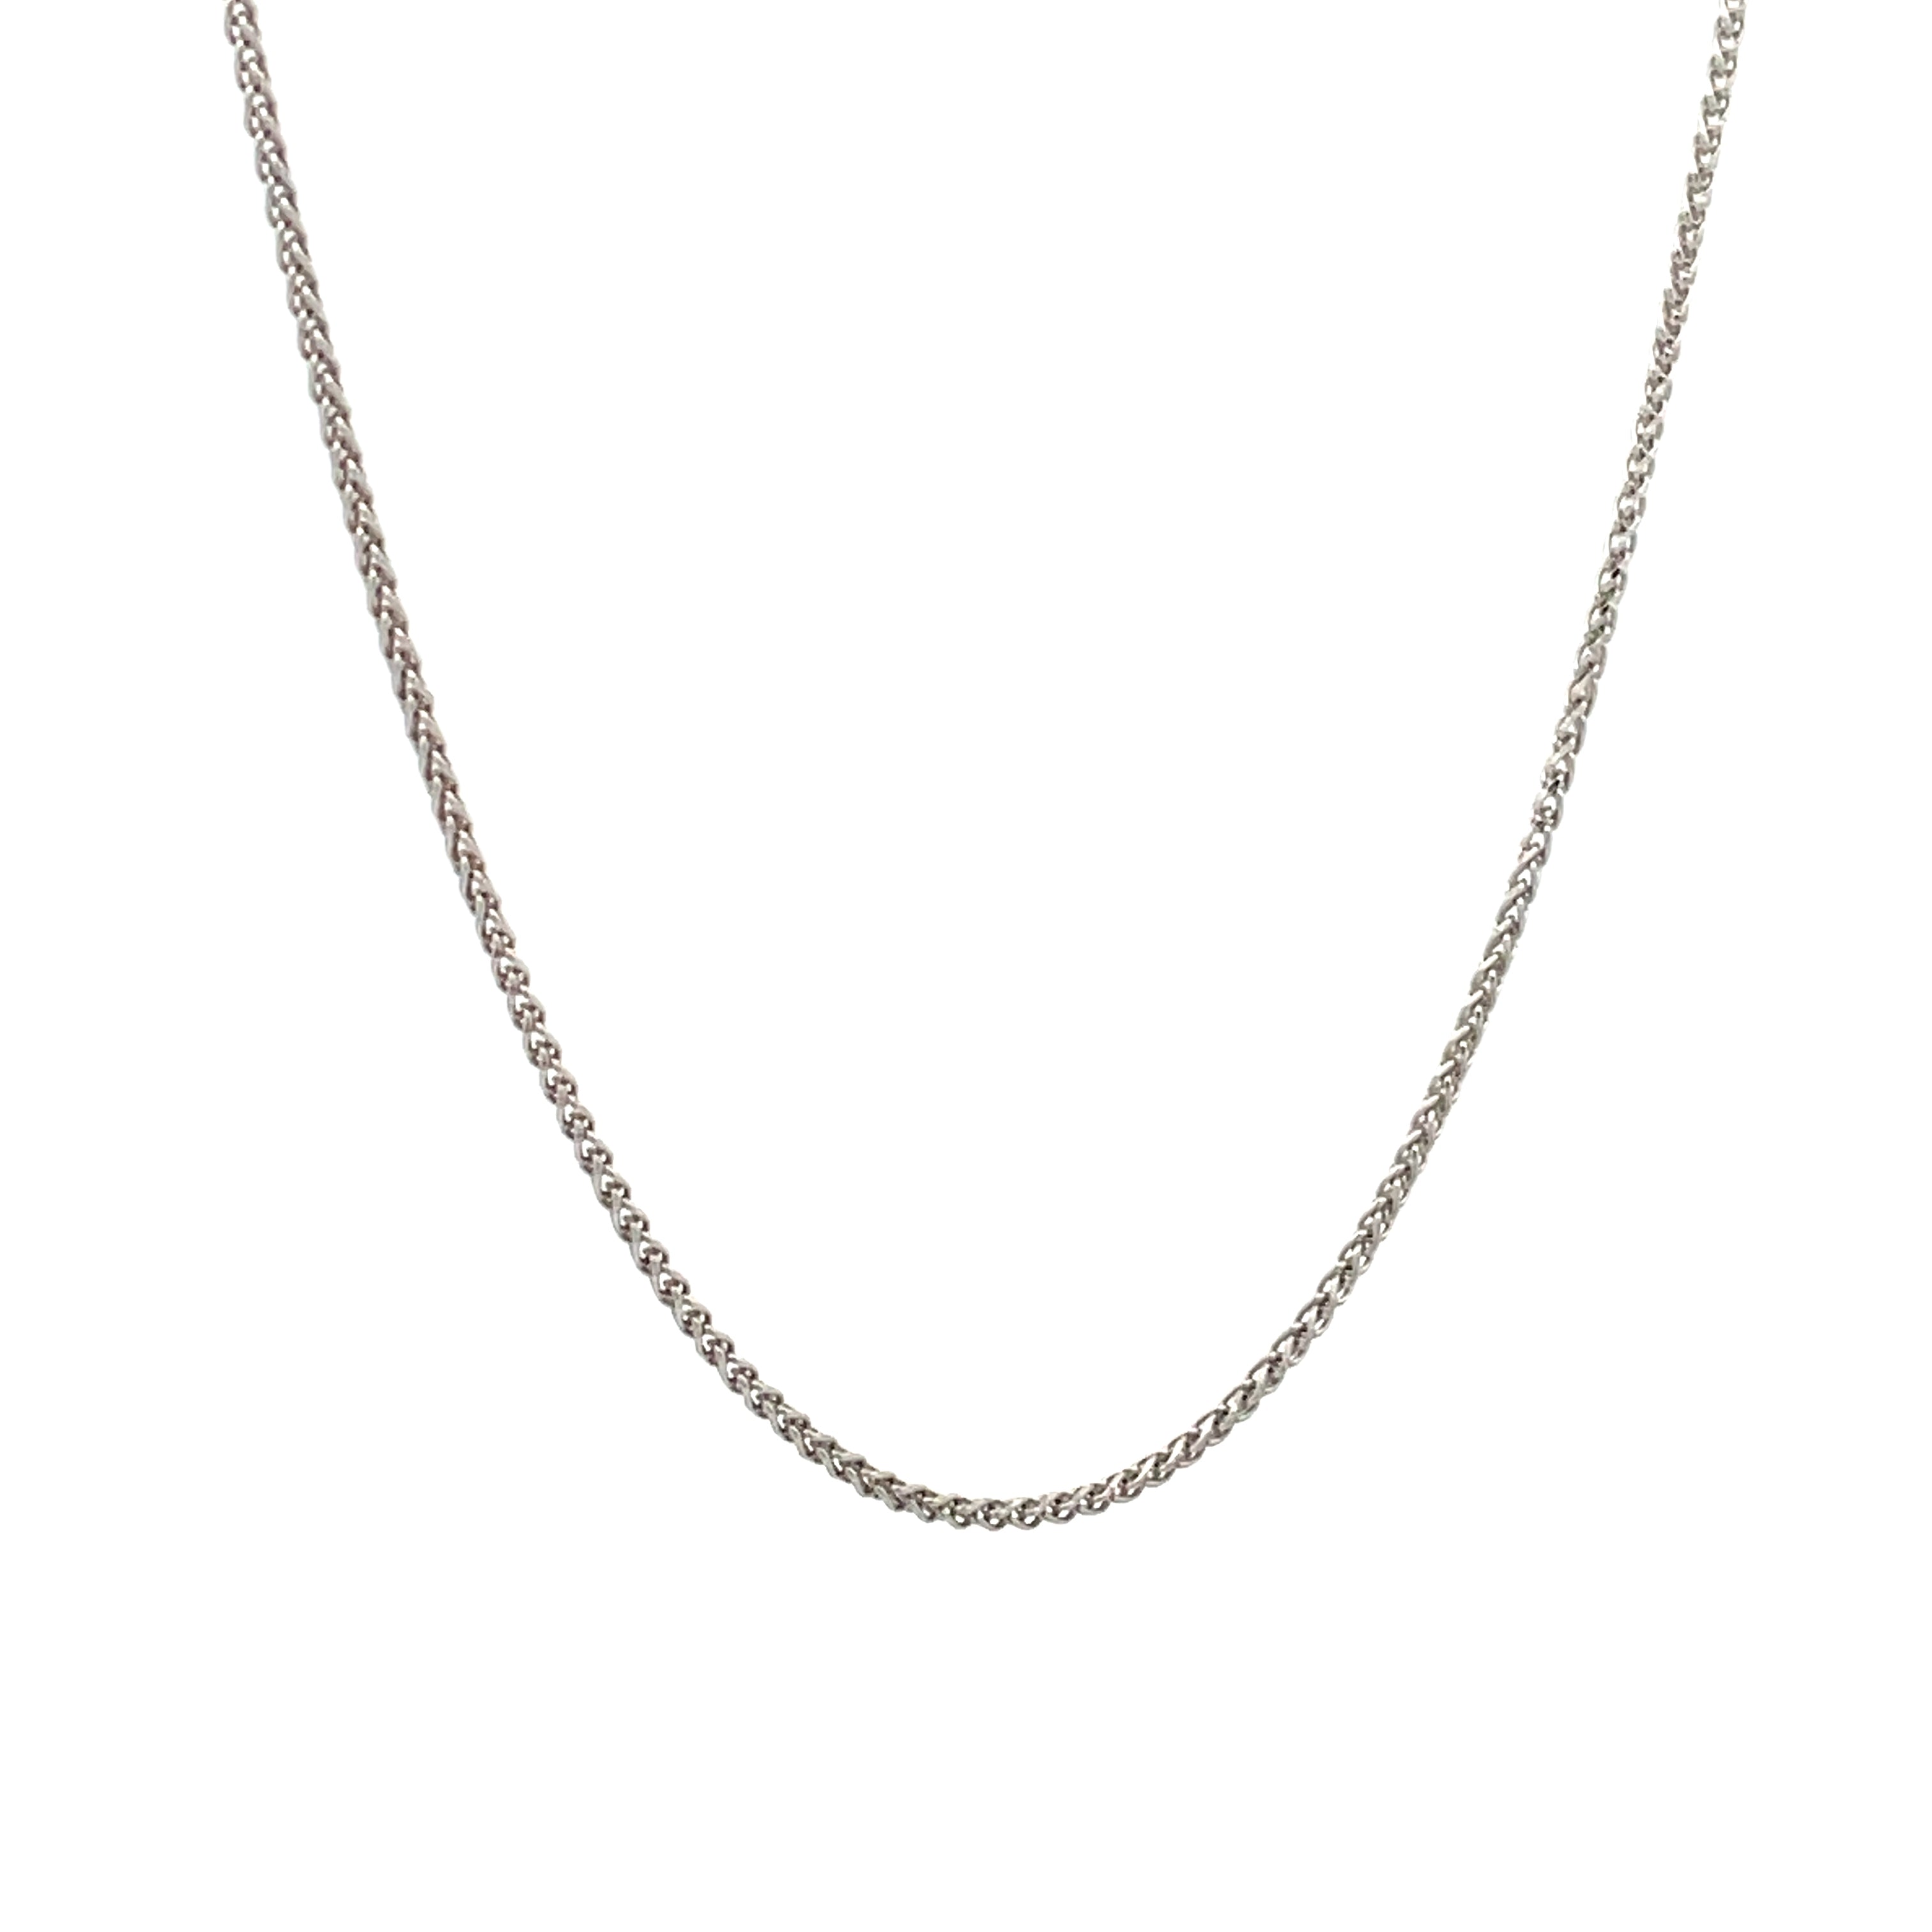 9ct Gold Plated Sterling Silver 1.5mm Foxtail Chain Necklace | Lengths 16